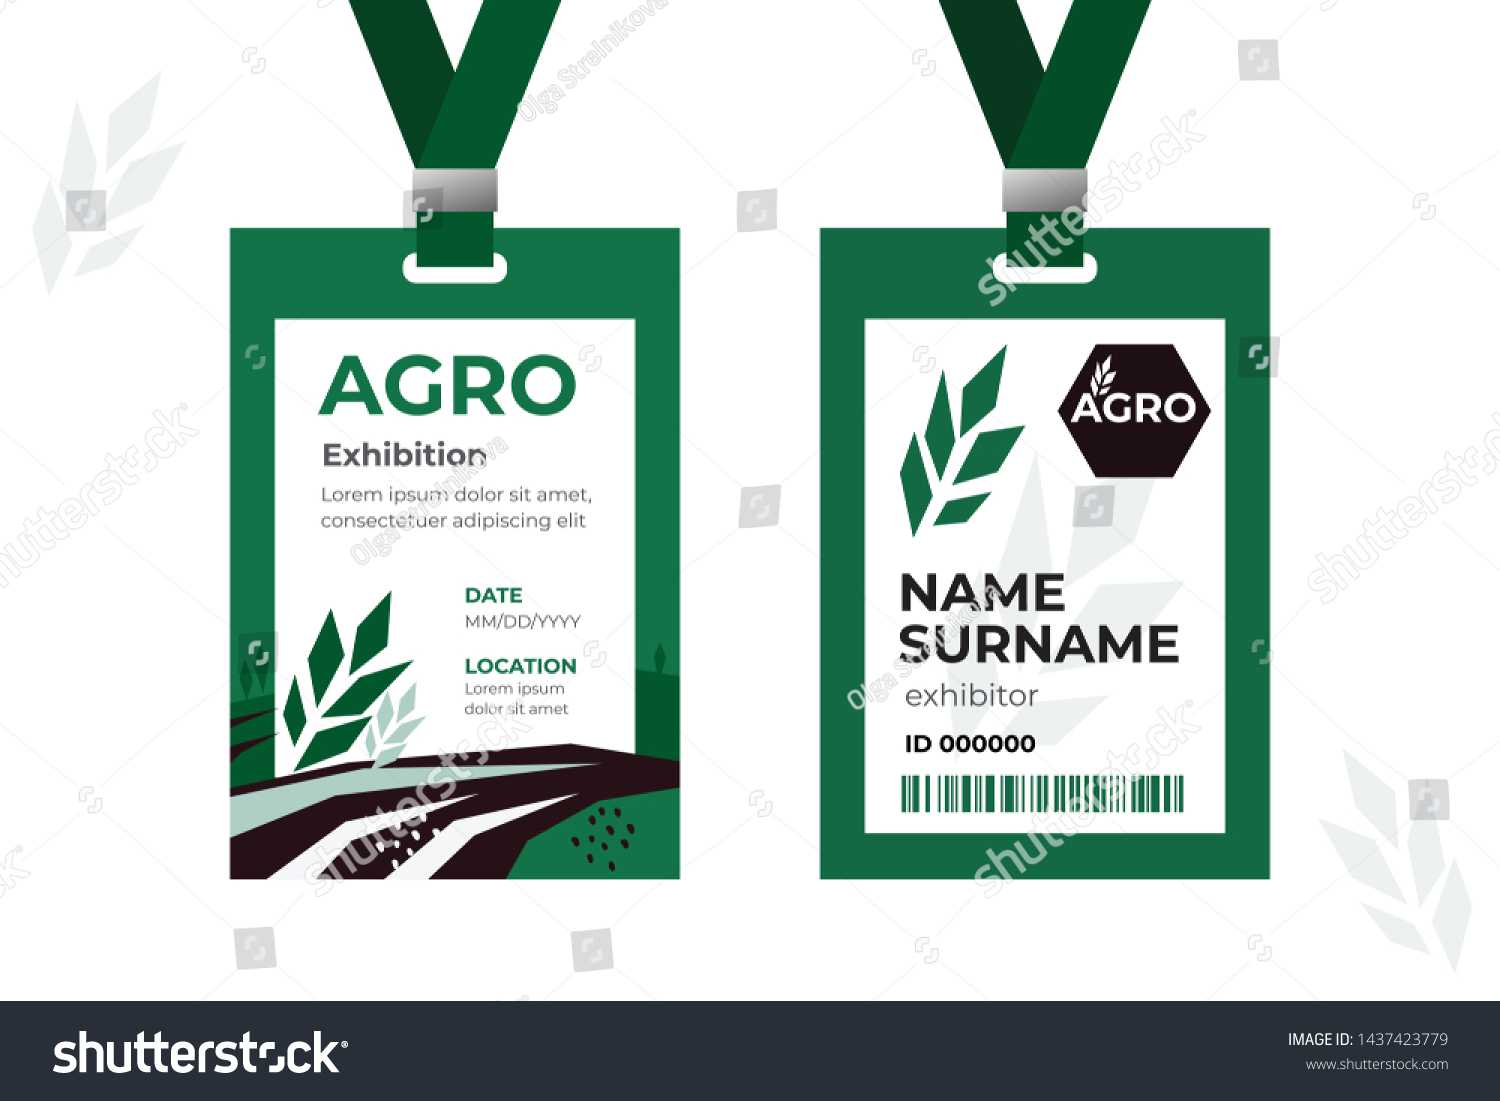 Vector Template Id Card Strap Design Stock Image | Download Now With Regard To Conference Id Card Template